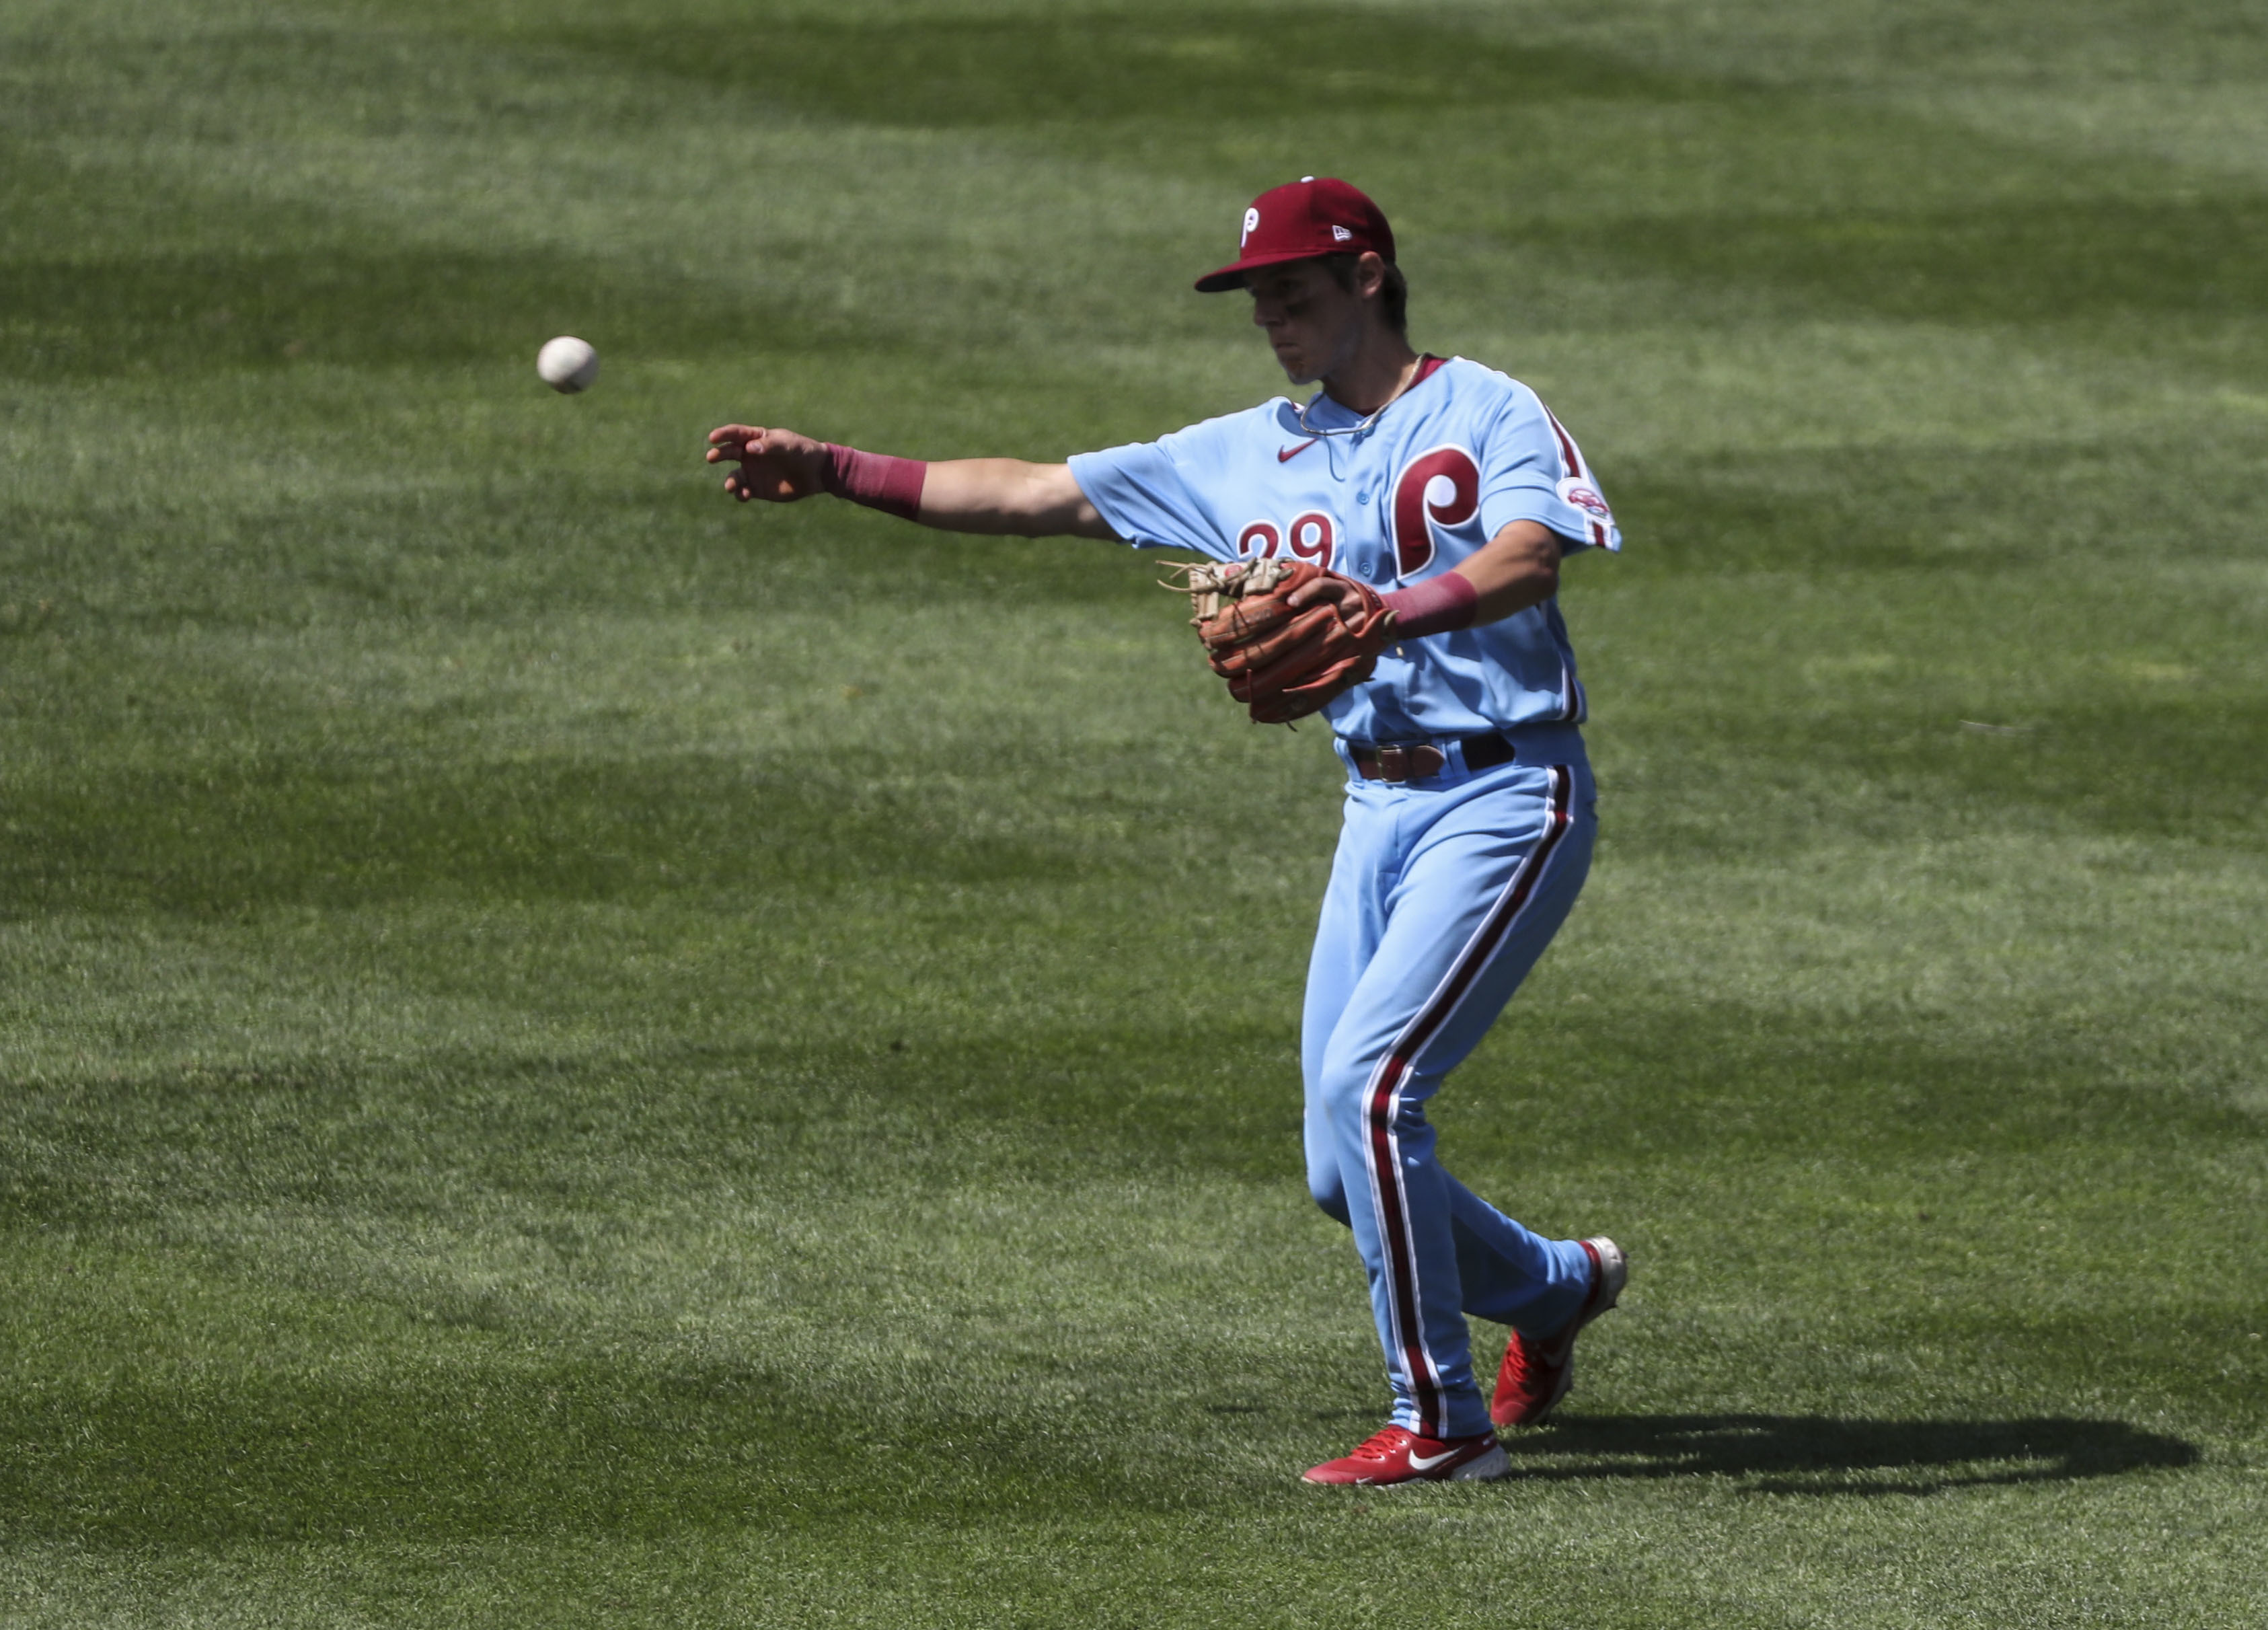 CAN NICK MATON BECOME THE PHILLIES NEXT CHASE UTLEY? HOPE SO